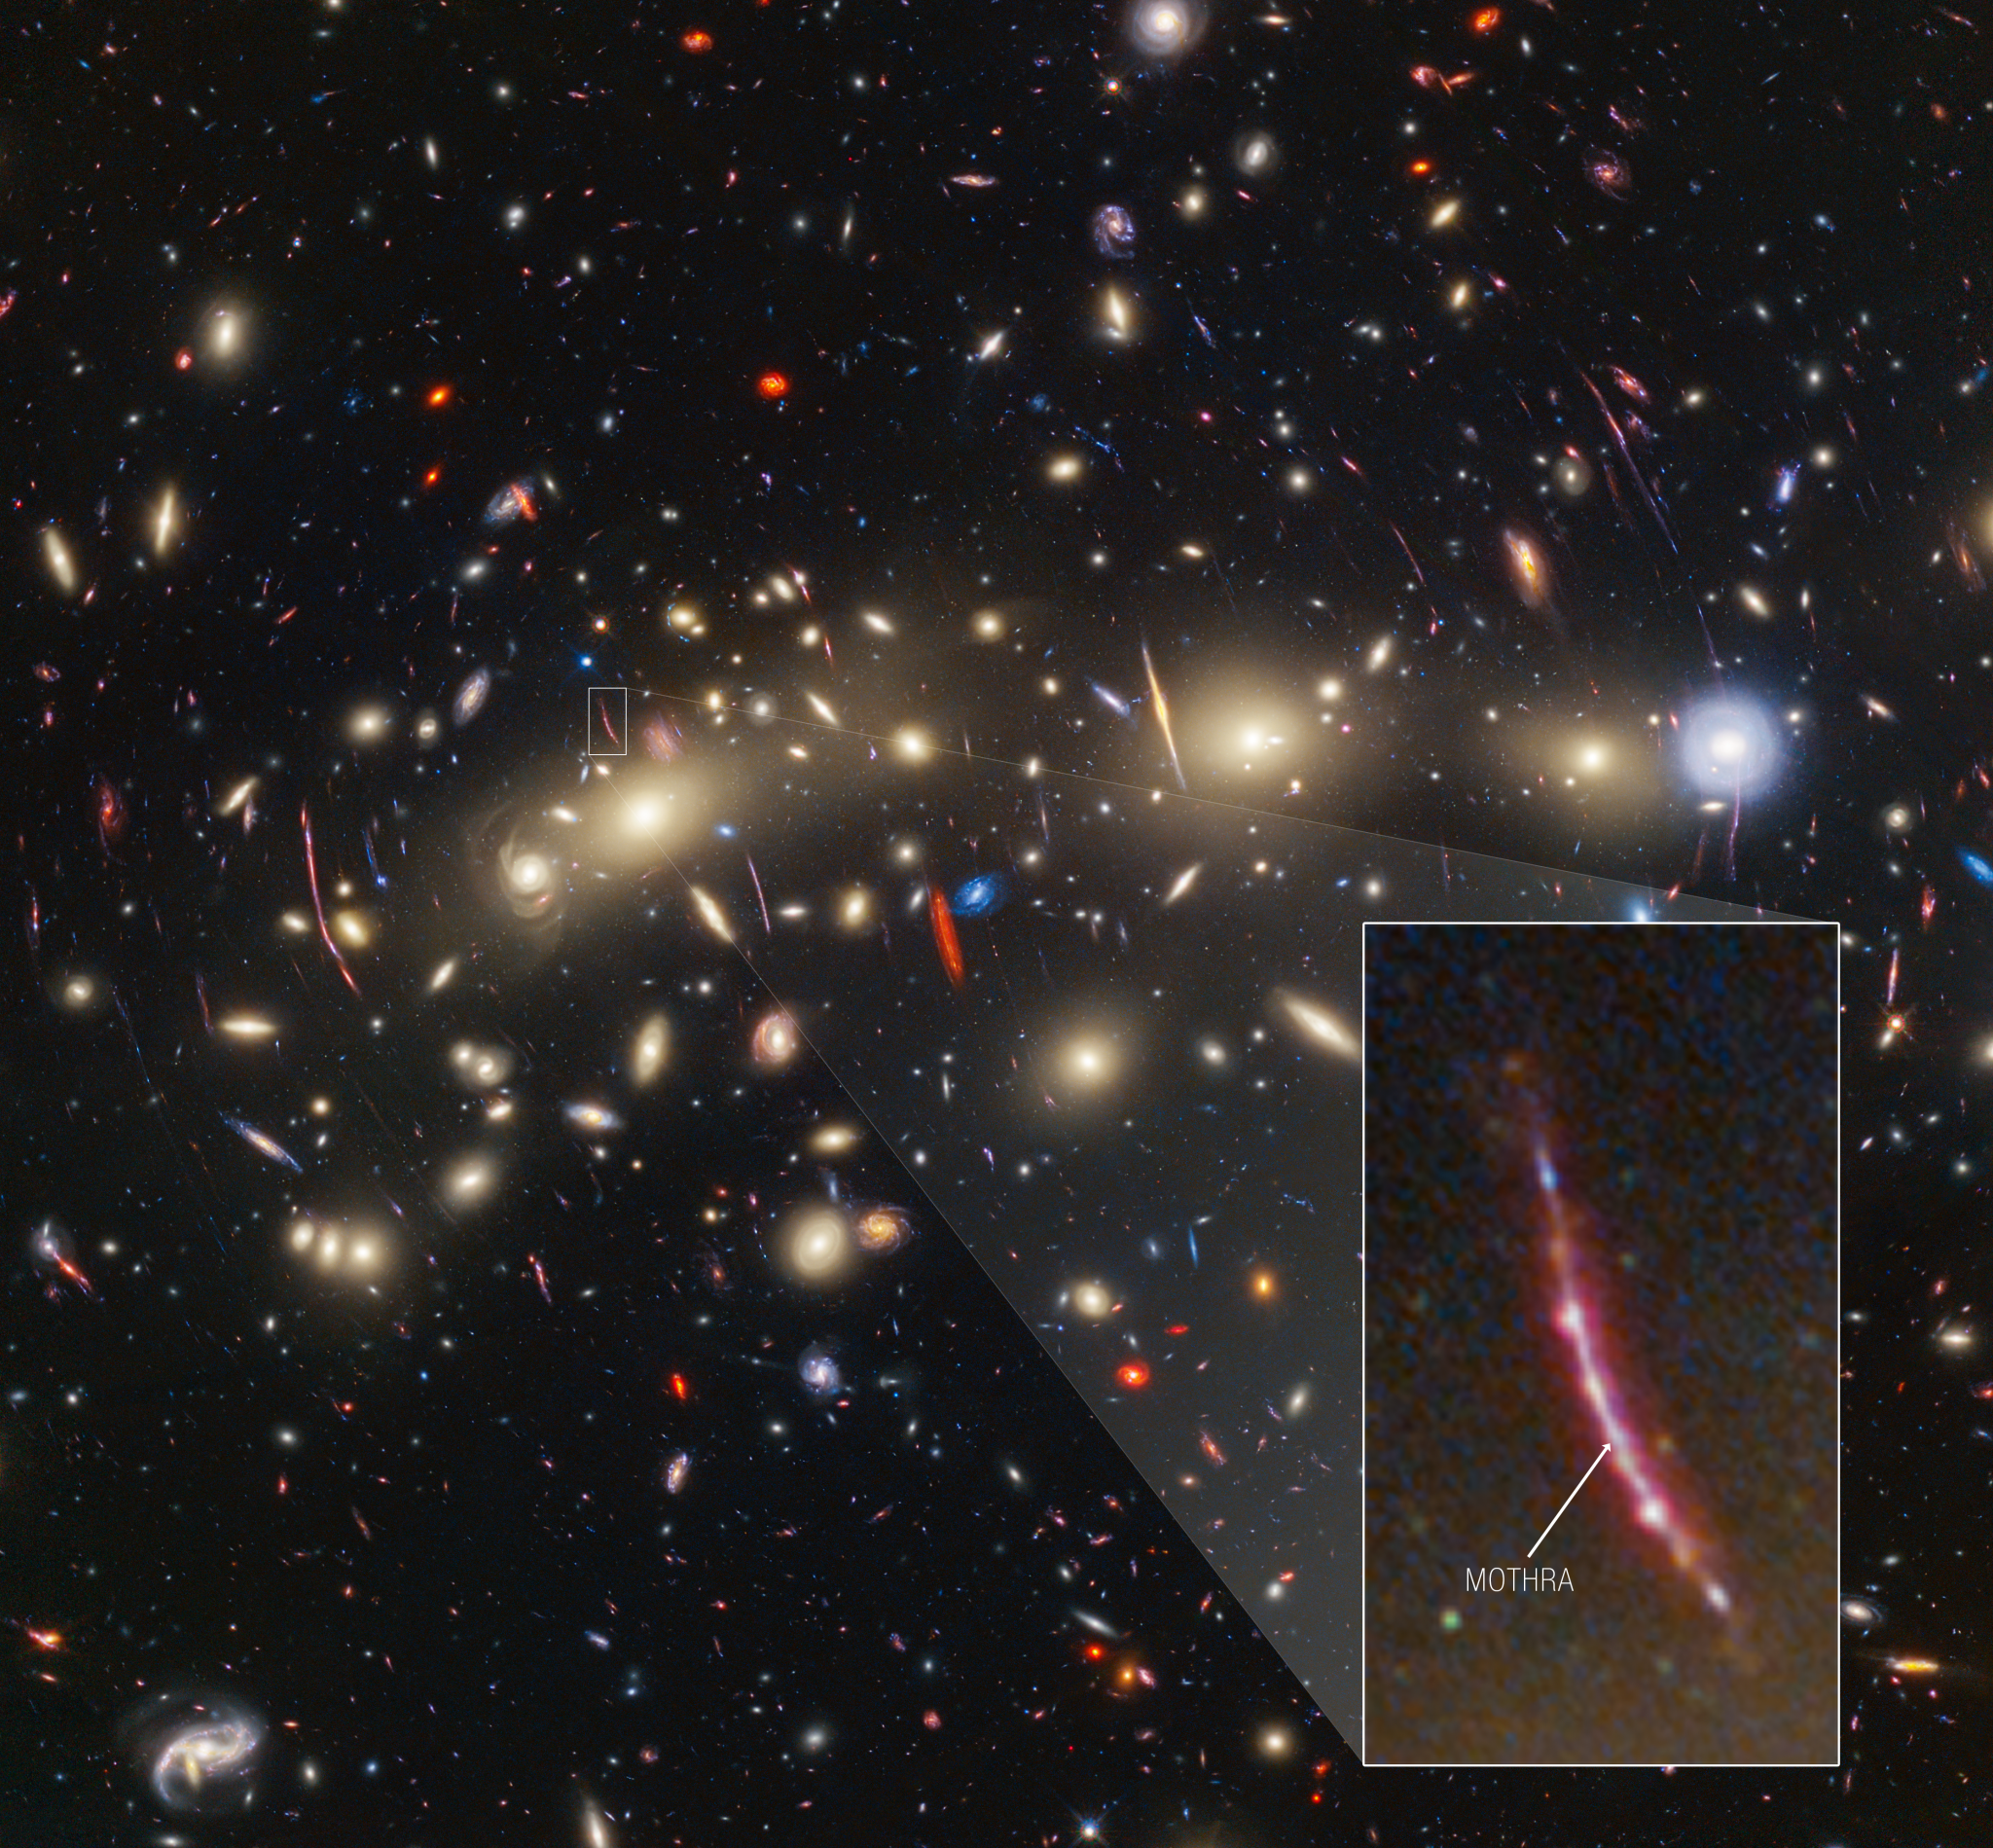 A field of galaxies on the black background of space. At center left, a particularly prominent linear feature stretches vertically. It is outlined by a white box, and a lightly shaded wedge leads to an enlarged view at the bottom right. A spot near the middle of the feature is labeled 'Mothra.'